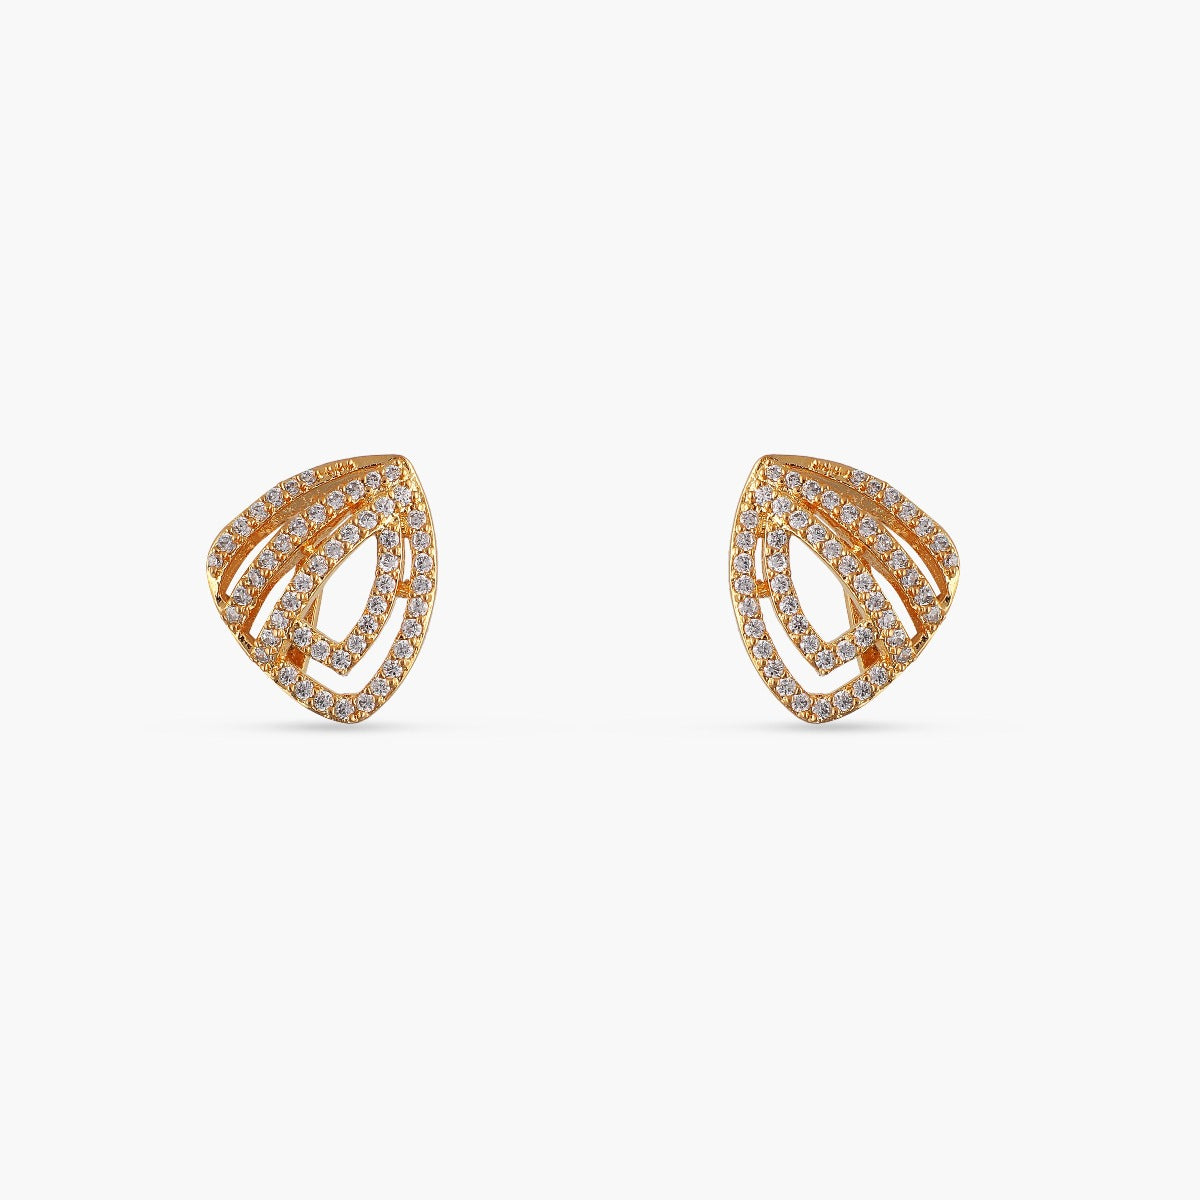 Gold Diamond Earrings - Sparkly Bridal Earrings, Gold Vintage Studs – Adina  Stone Jewelry